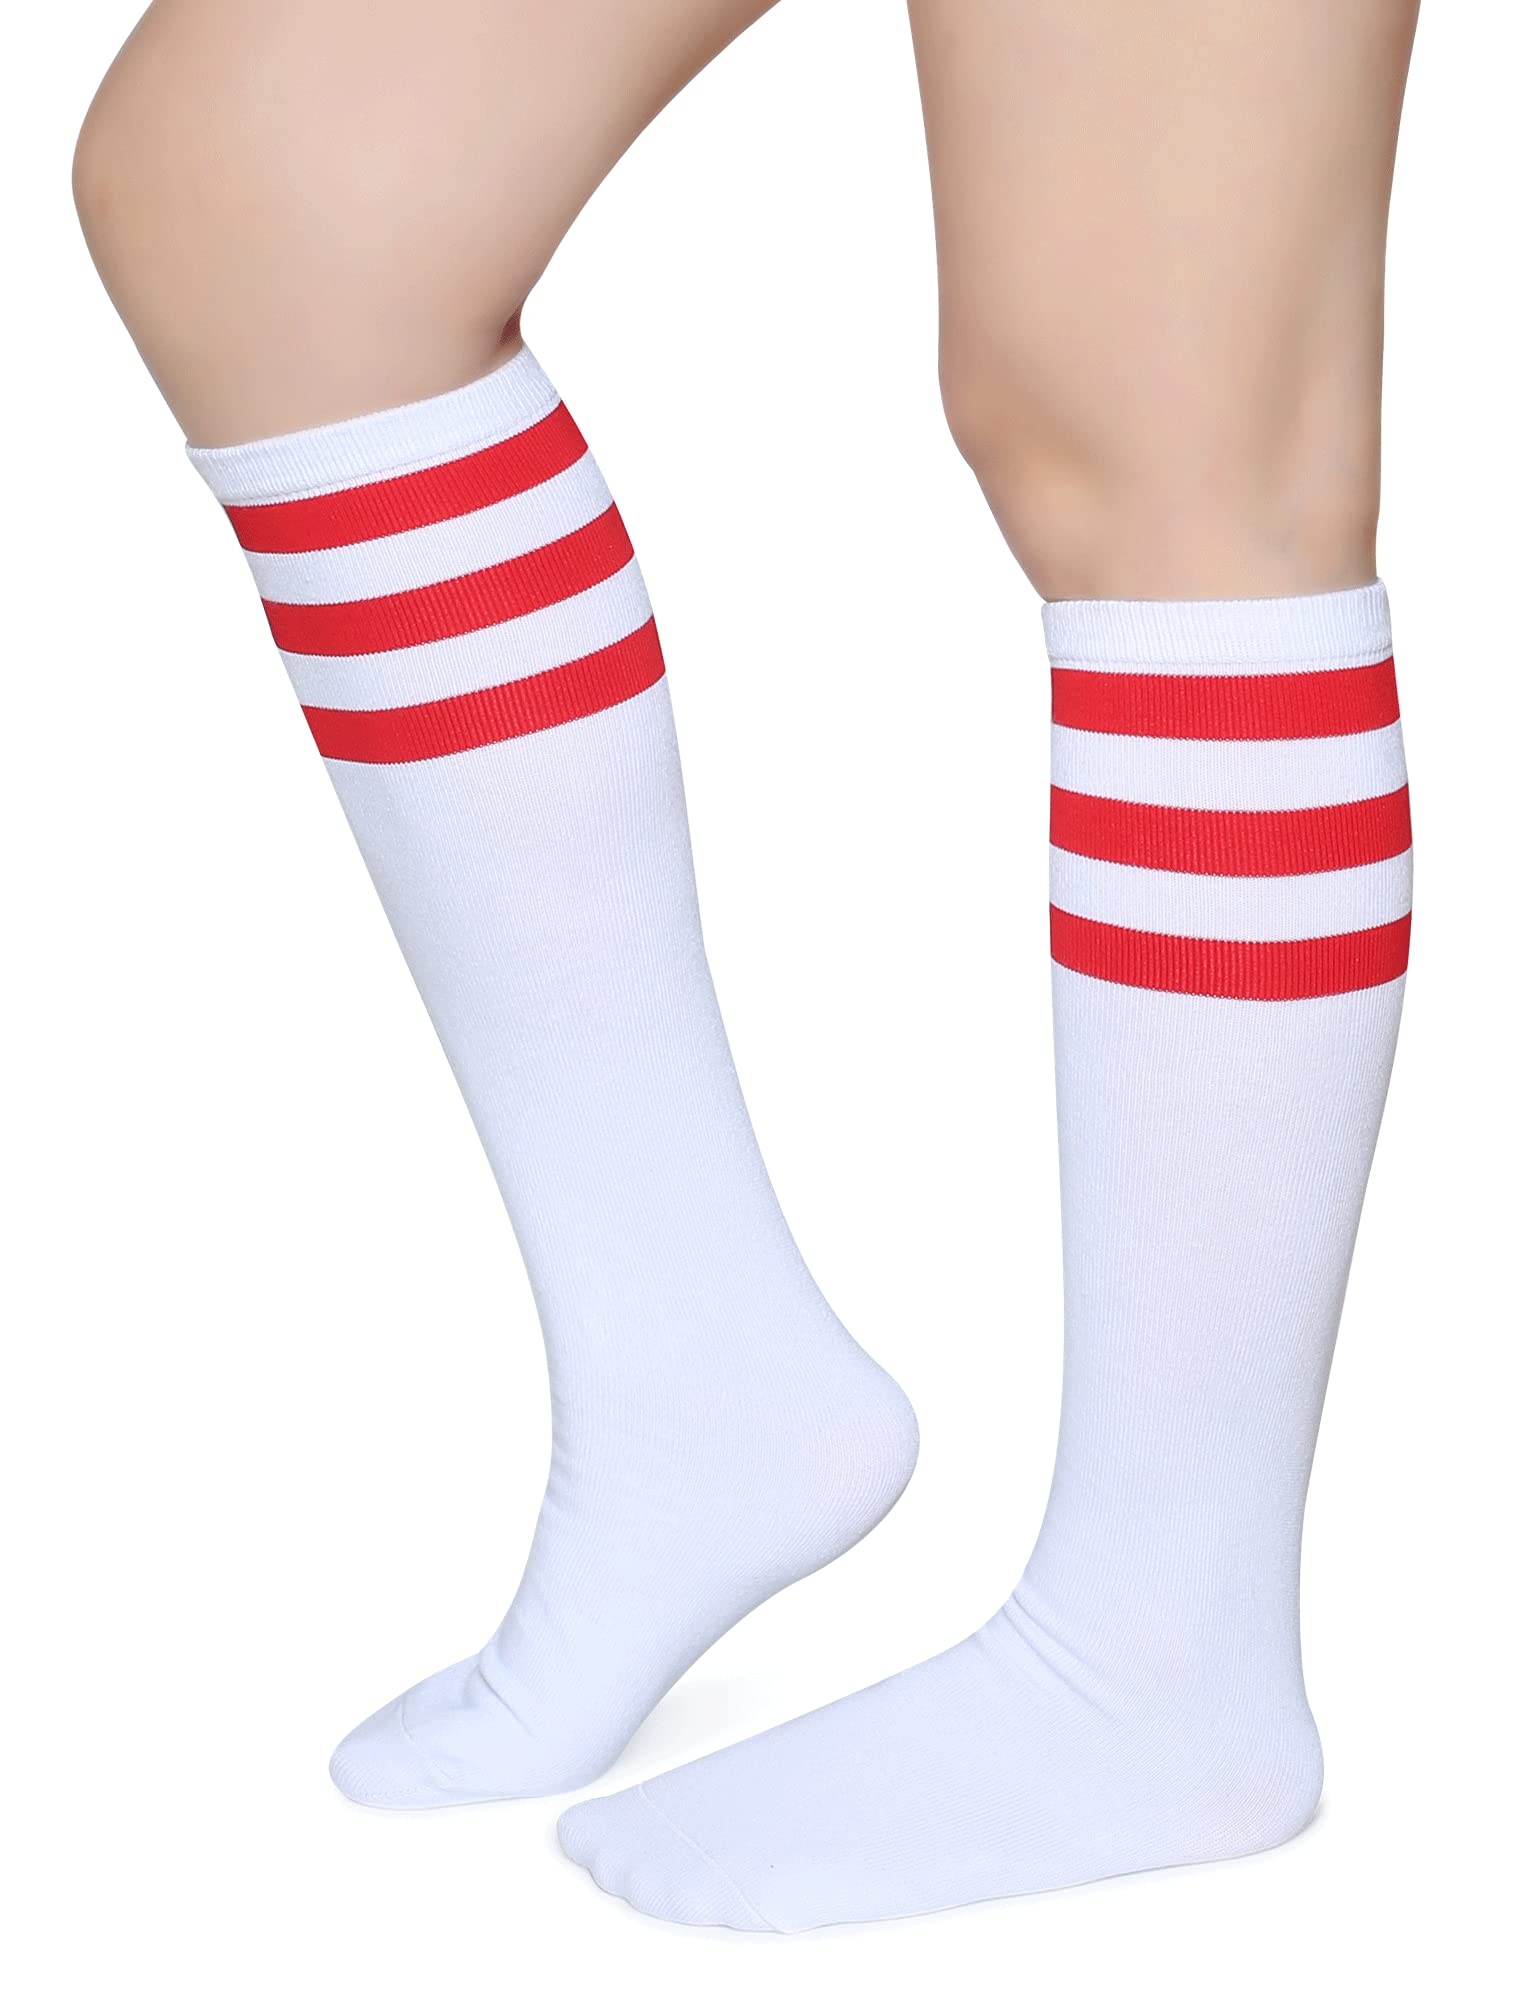 Pareberry Casual Cotton Solid & Triple Stripe Colors Knee High Tube Socks-3 Pairs (A08-Red/White)